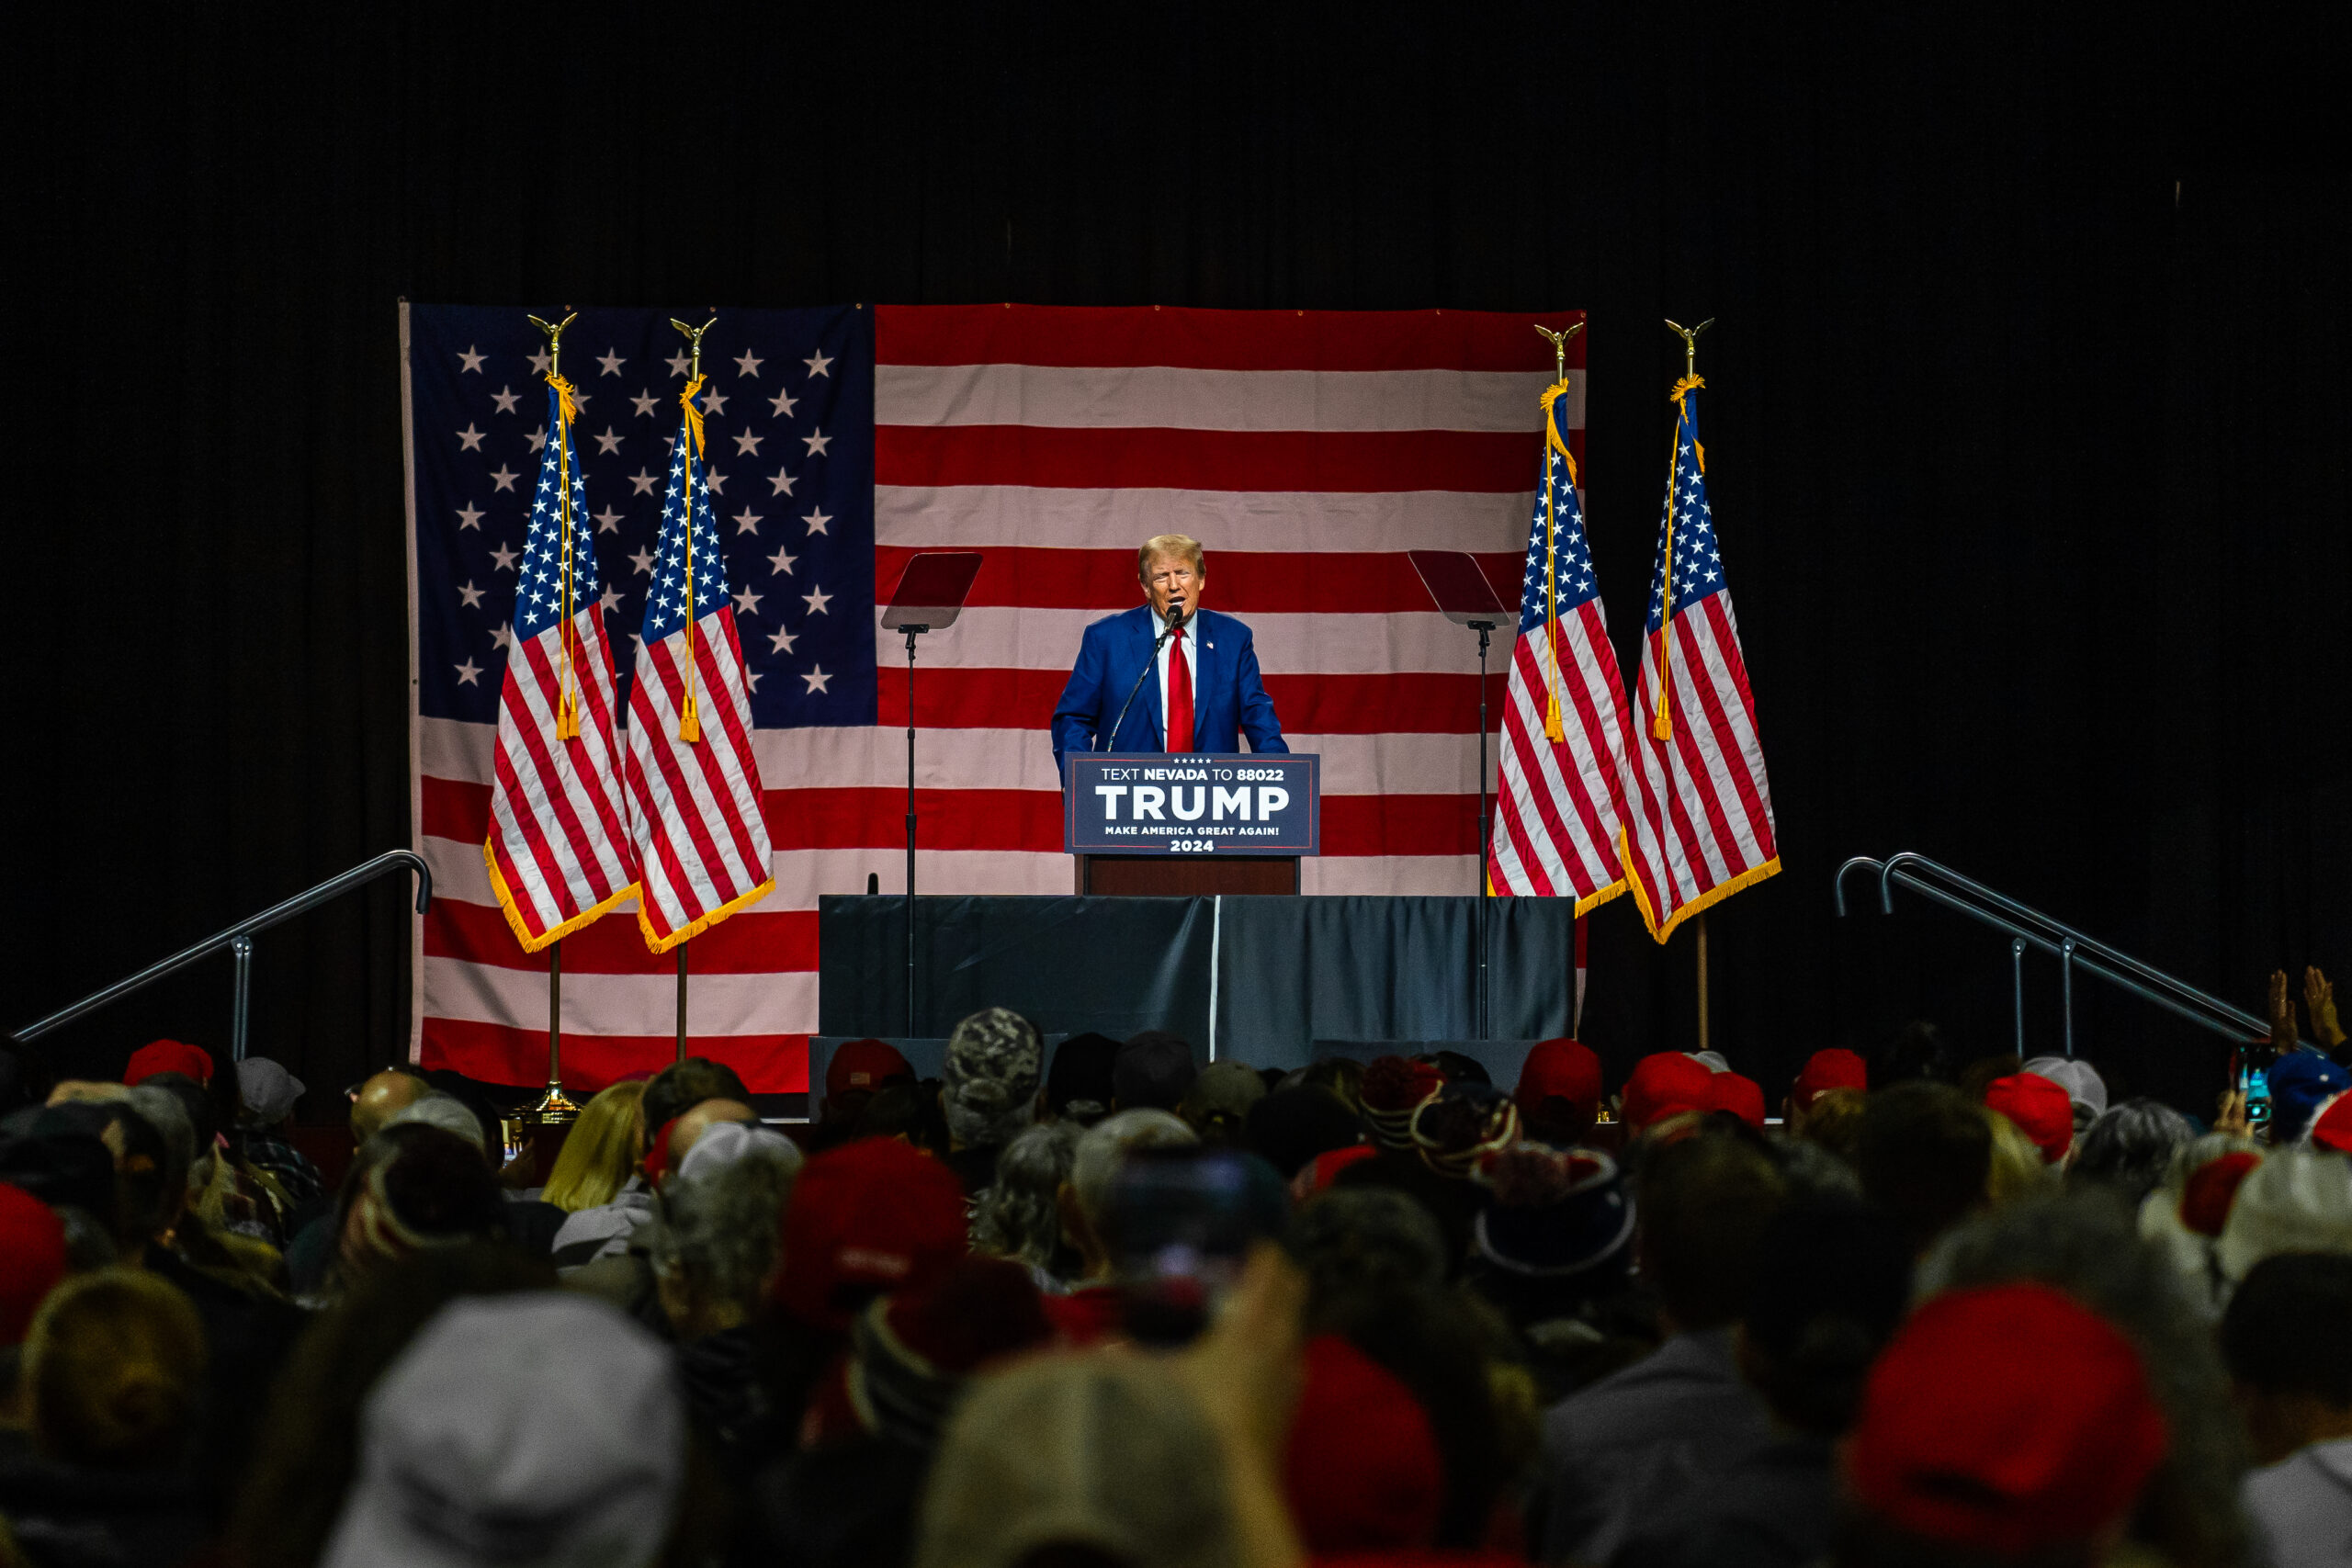 UNR students attend rally for former President Donald Trump in Reno